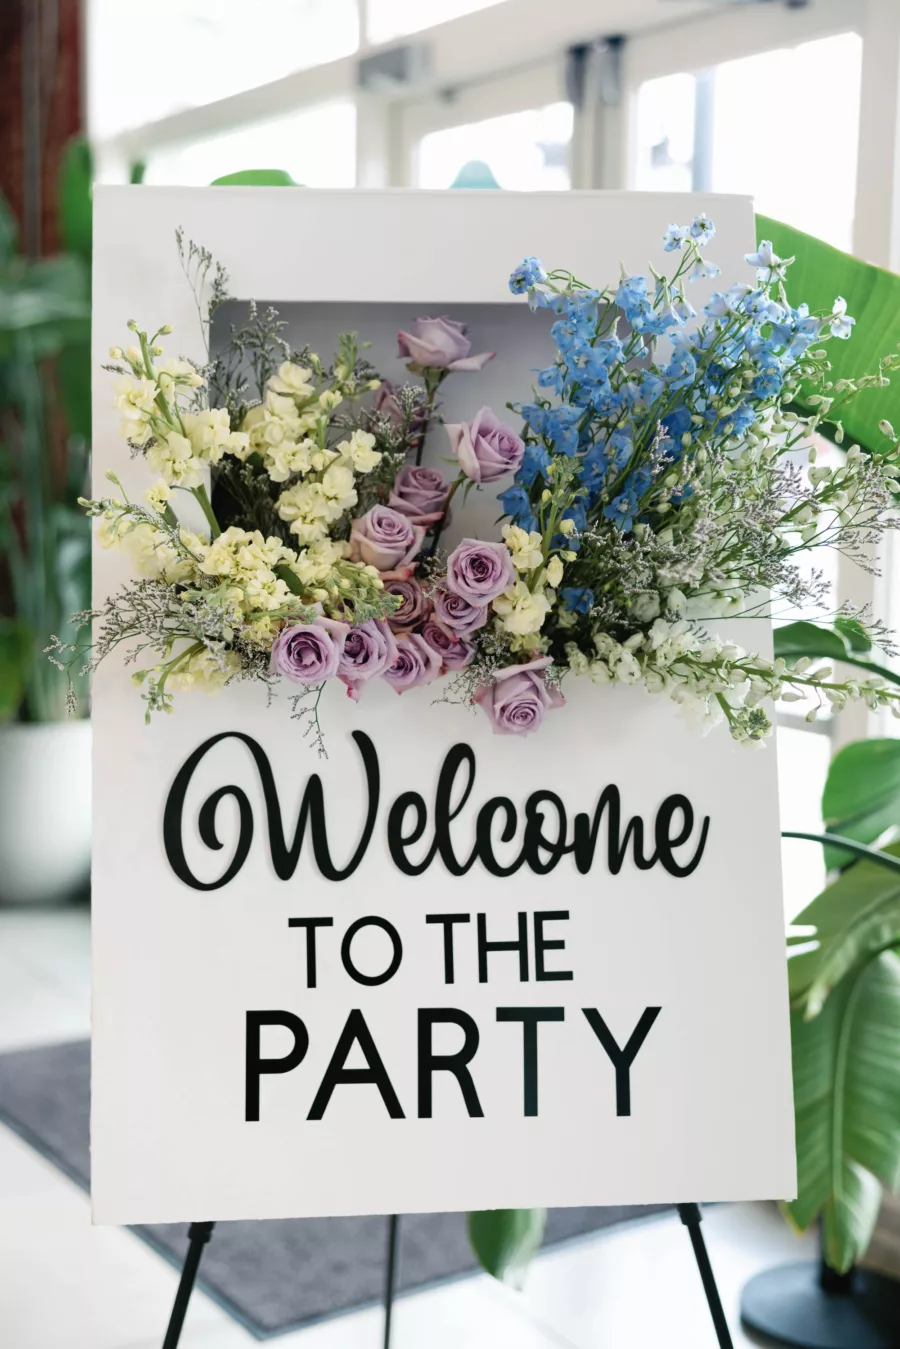 Modern Whimsical Welcome to the Party Spring Wedding Sign Decor Inspiration with Purple Roses, Lily of the Valley, and White Stock Flowers